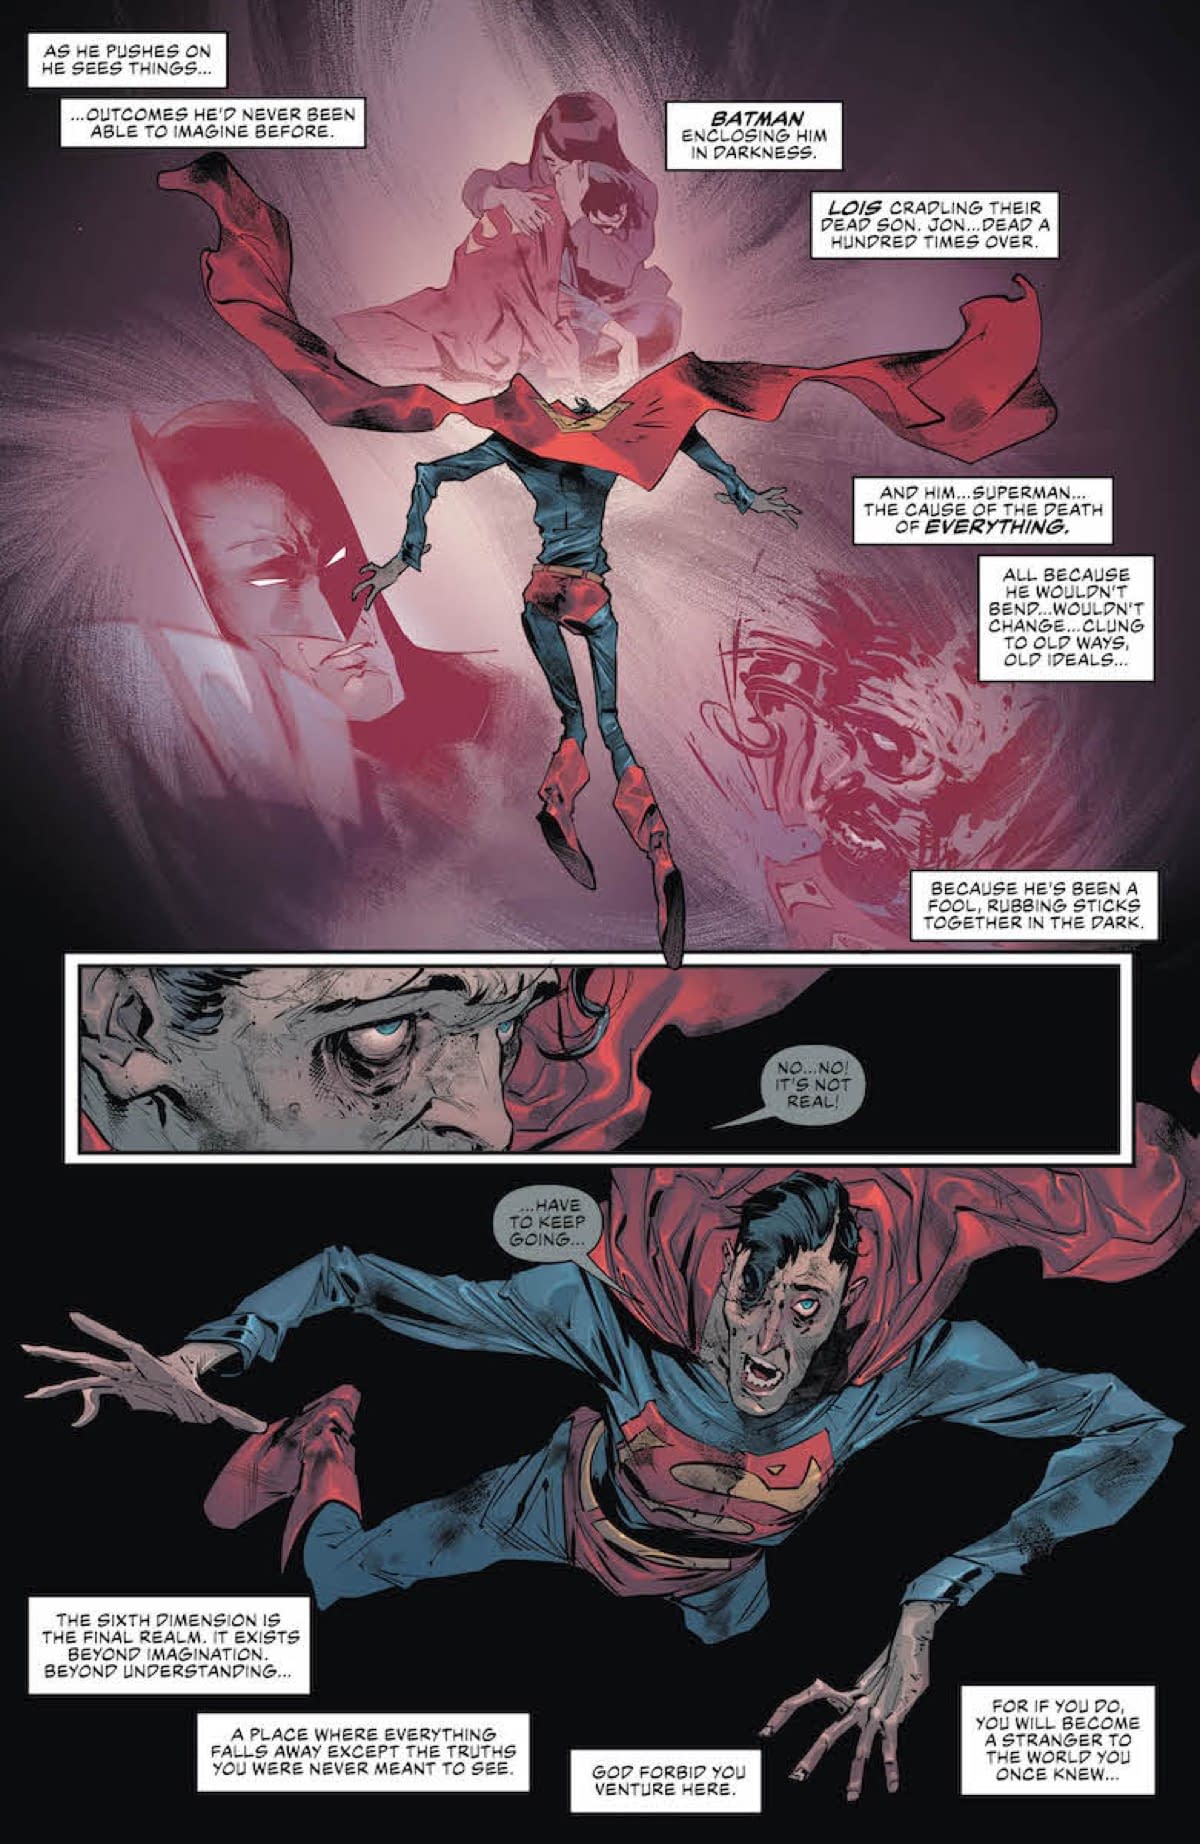 Superman Still Can't Stop Imagining Lois's Death (Justice League #24 Preview)